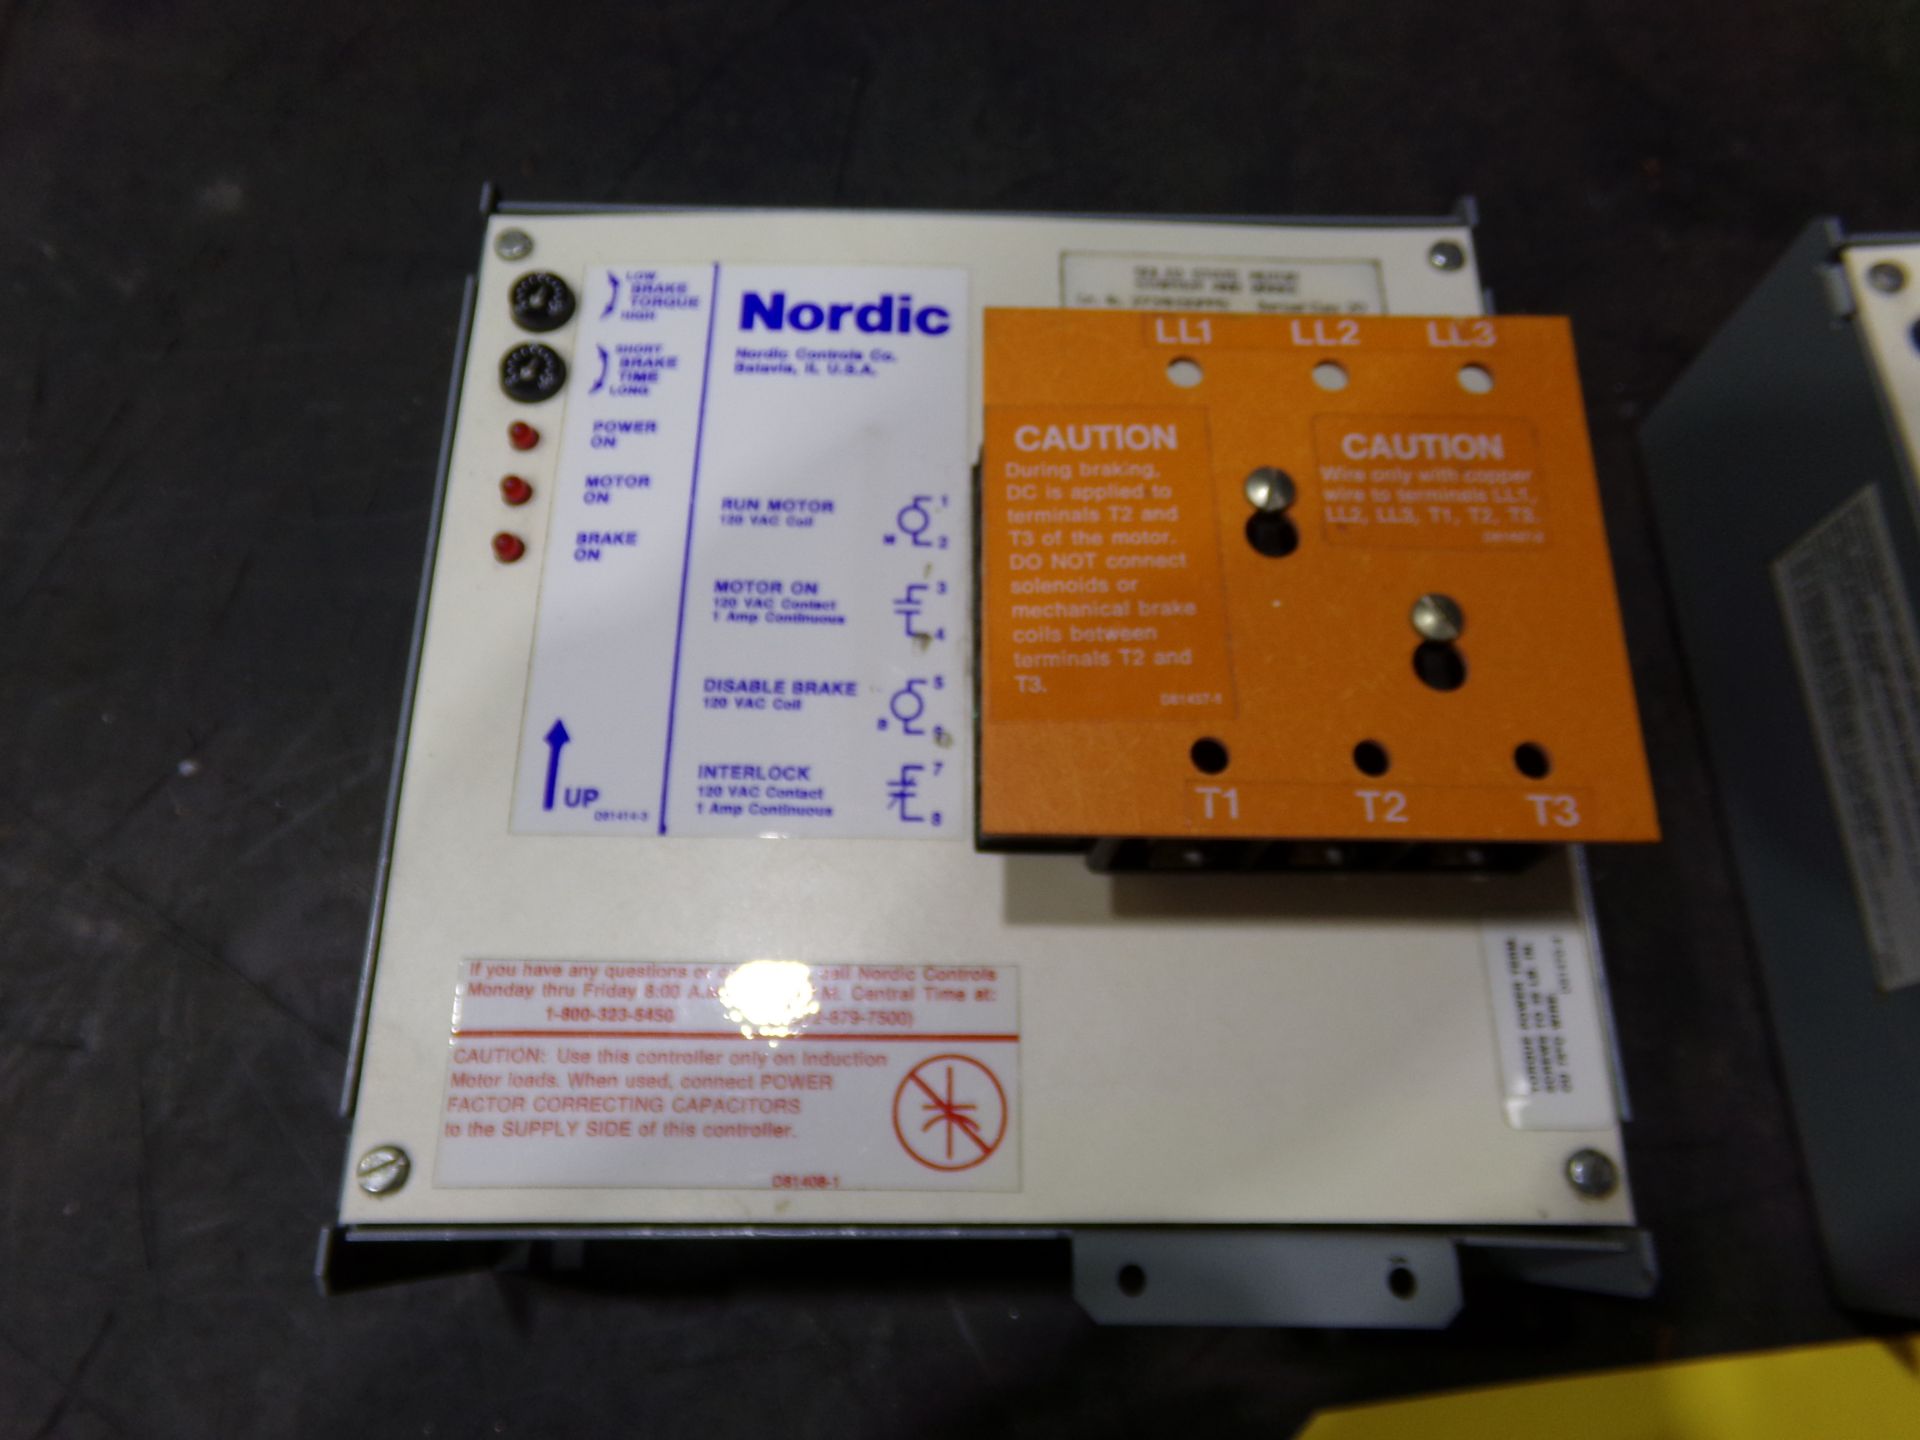 NORDIC CONTROLS SOLID STATE MOTOR STARTER AND BRAKE CONTROL RATED 7.5HP 3PH 460V 60HZ 12A - Image 3 of 9